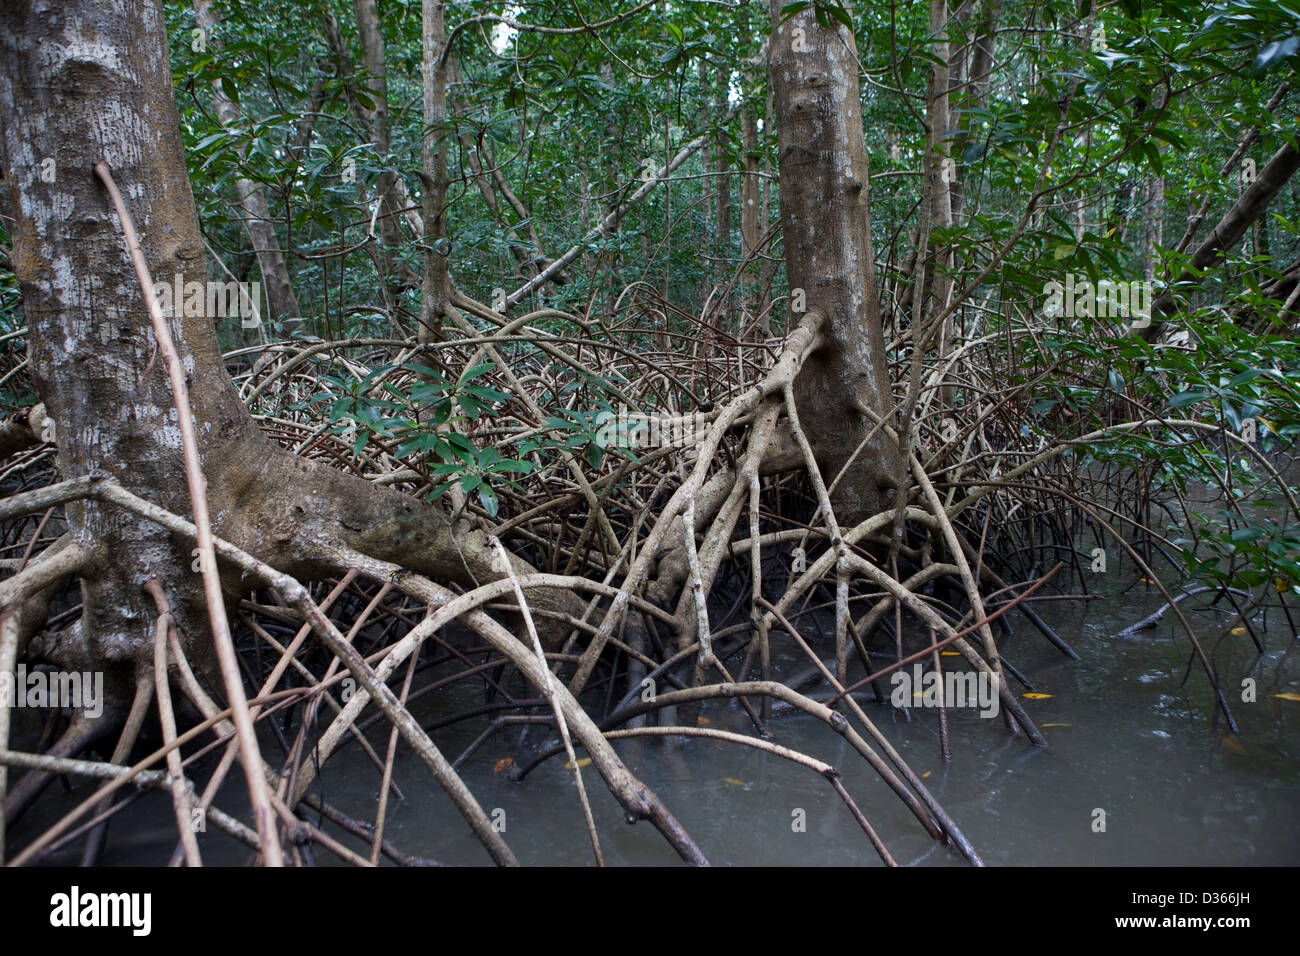 LIBREVILLE, GABON, 5th October 2012:  These mangroves are ideal fish sporning grounds and are a protected area. Stock Photo